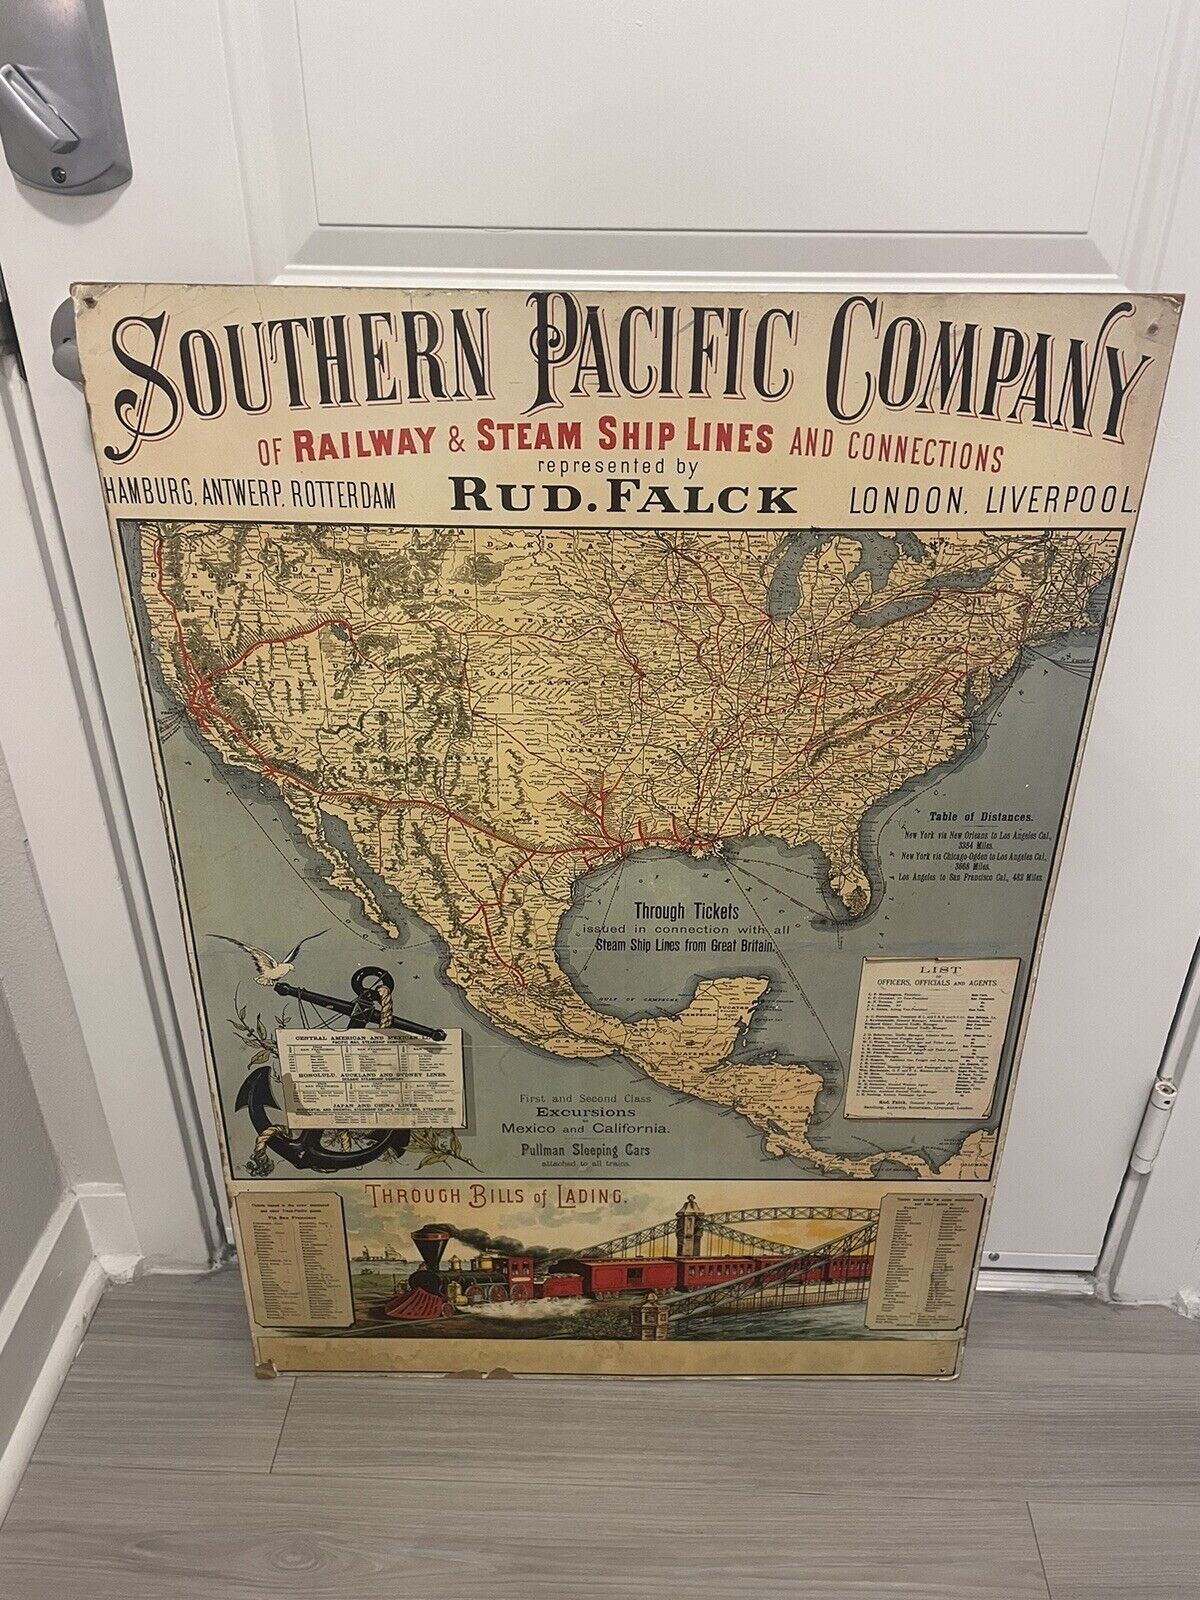 Antique Southern Pacific Co of Railway & Steam Ship Lines Wall Map 38 1/2” x 27”